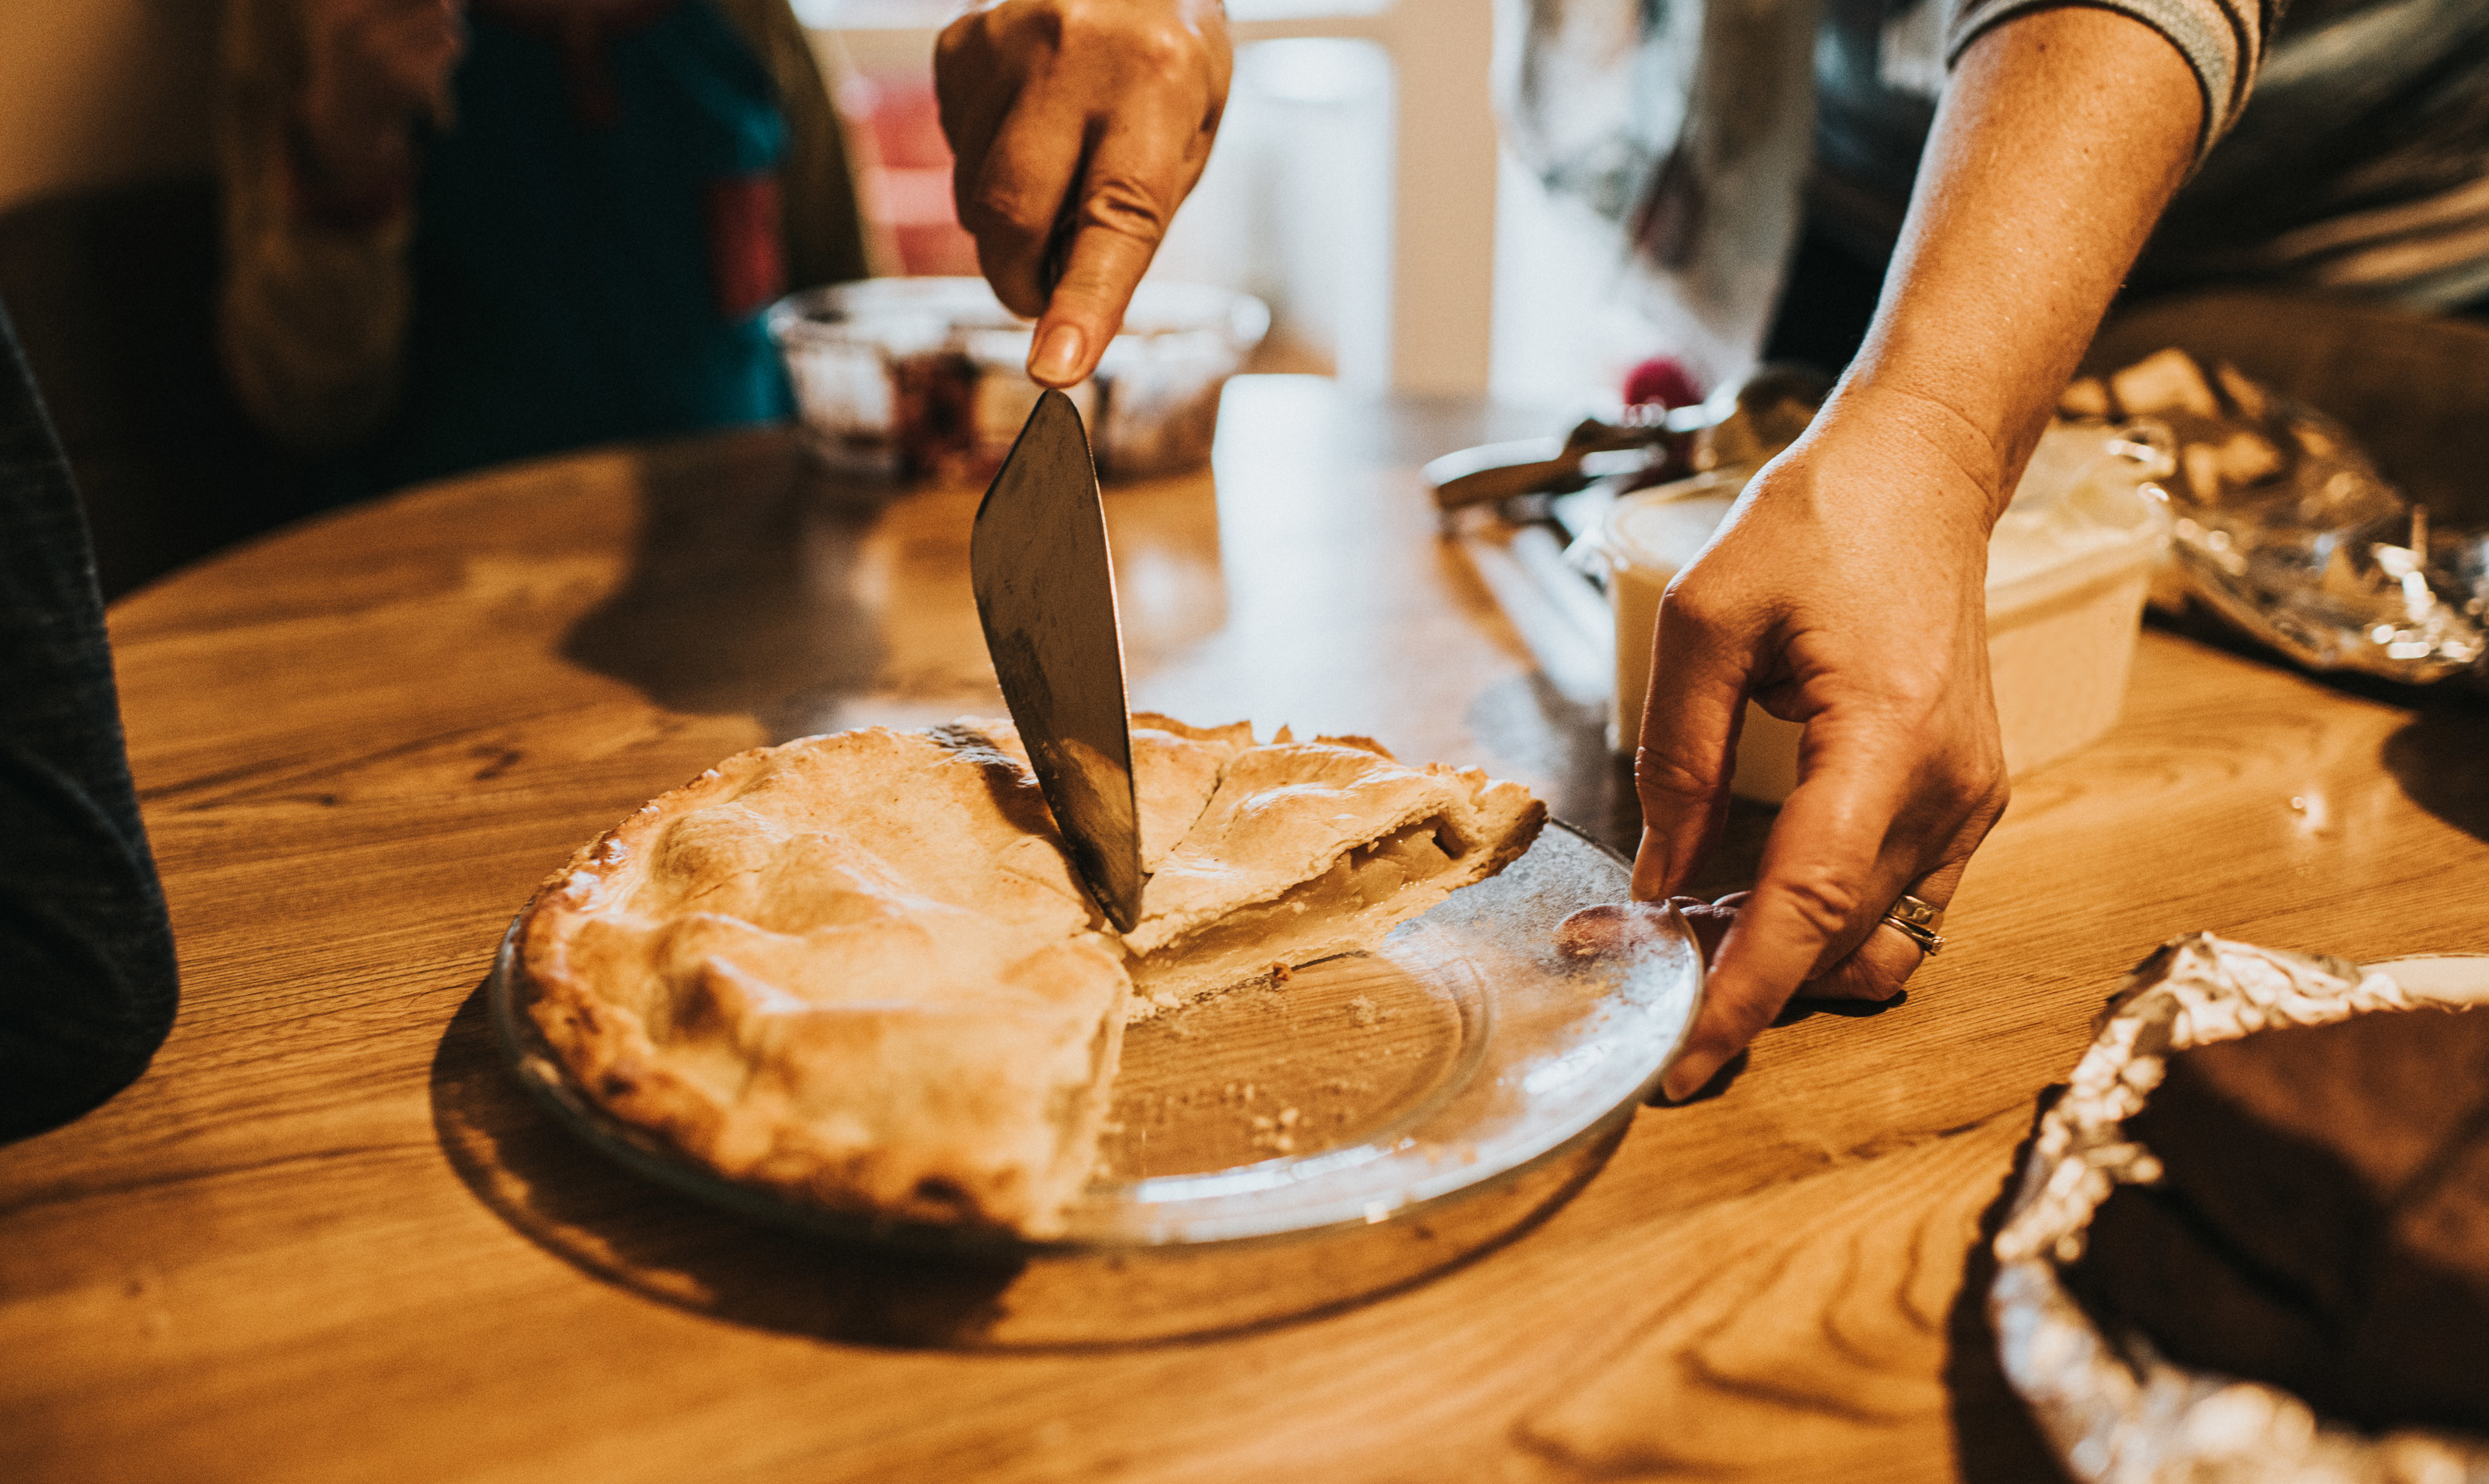 Hands cutting into a pie